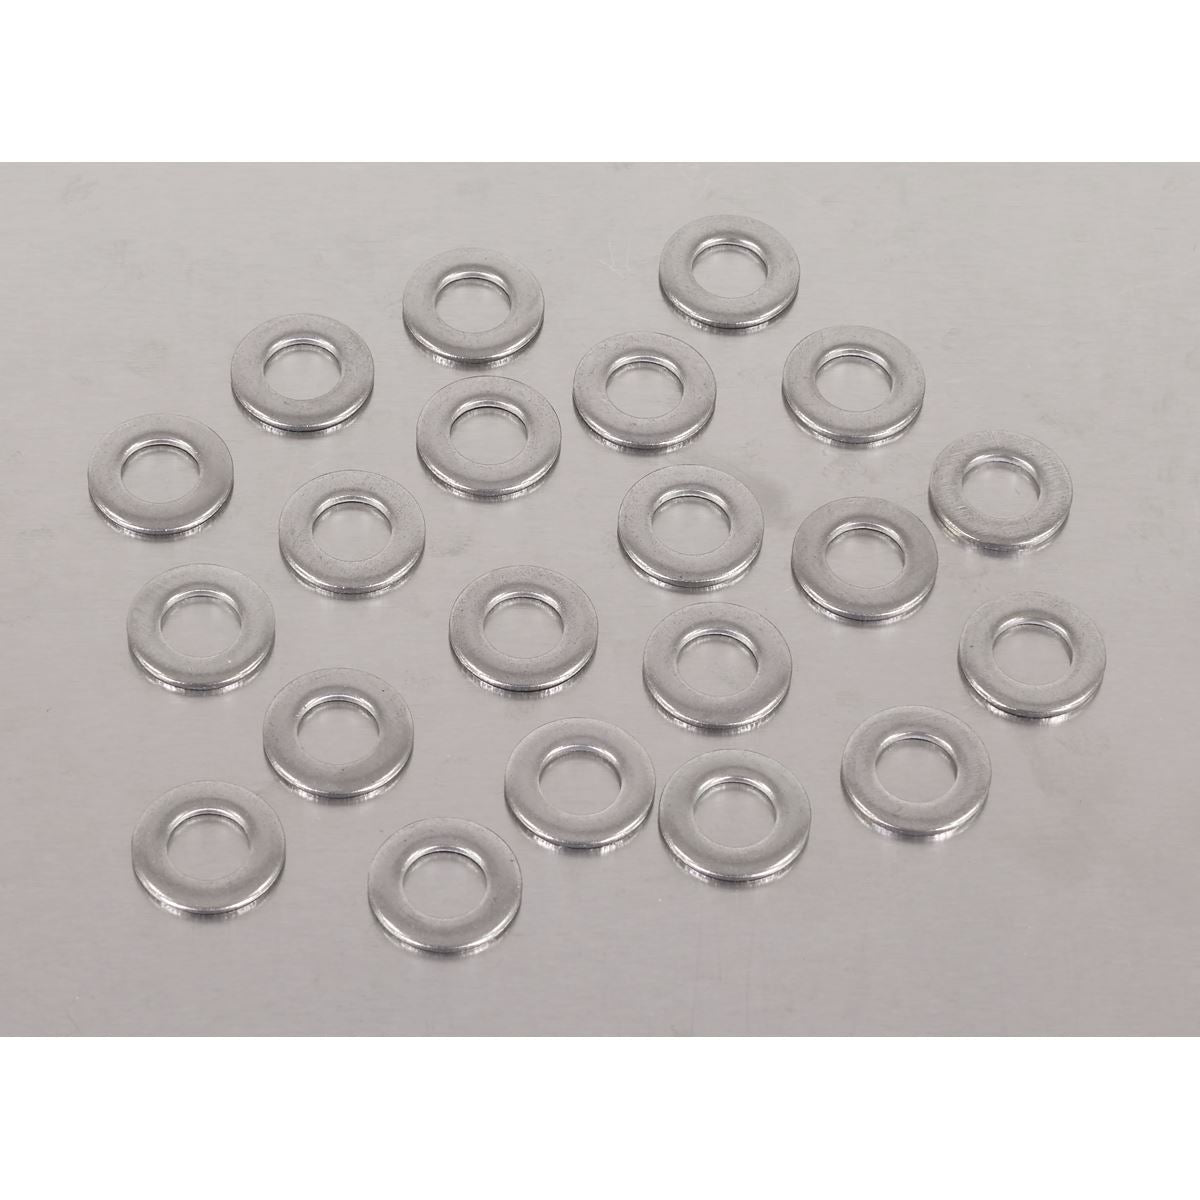 Sealey Stainless Steel Flat Washer Din 125 – M8 - Pack of 100